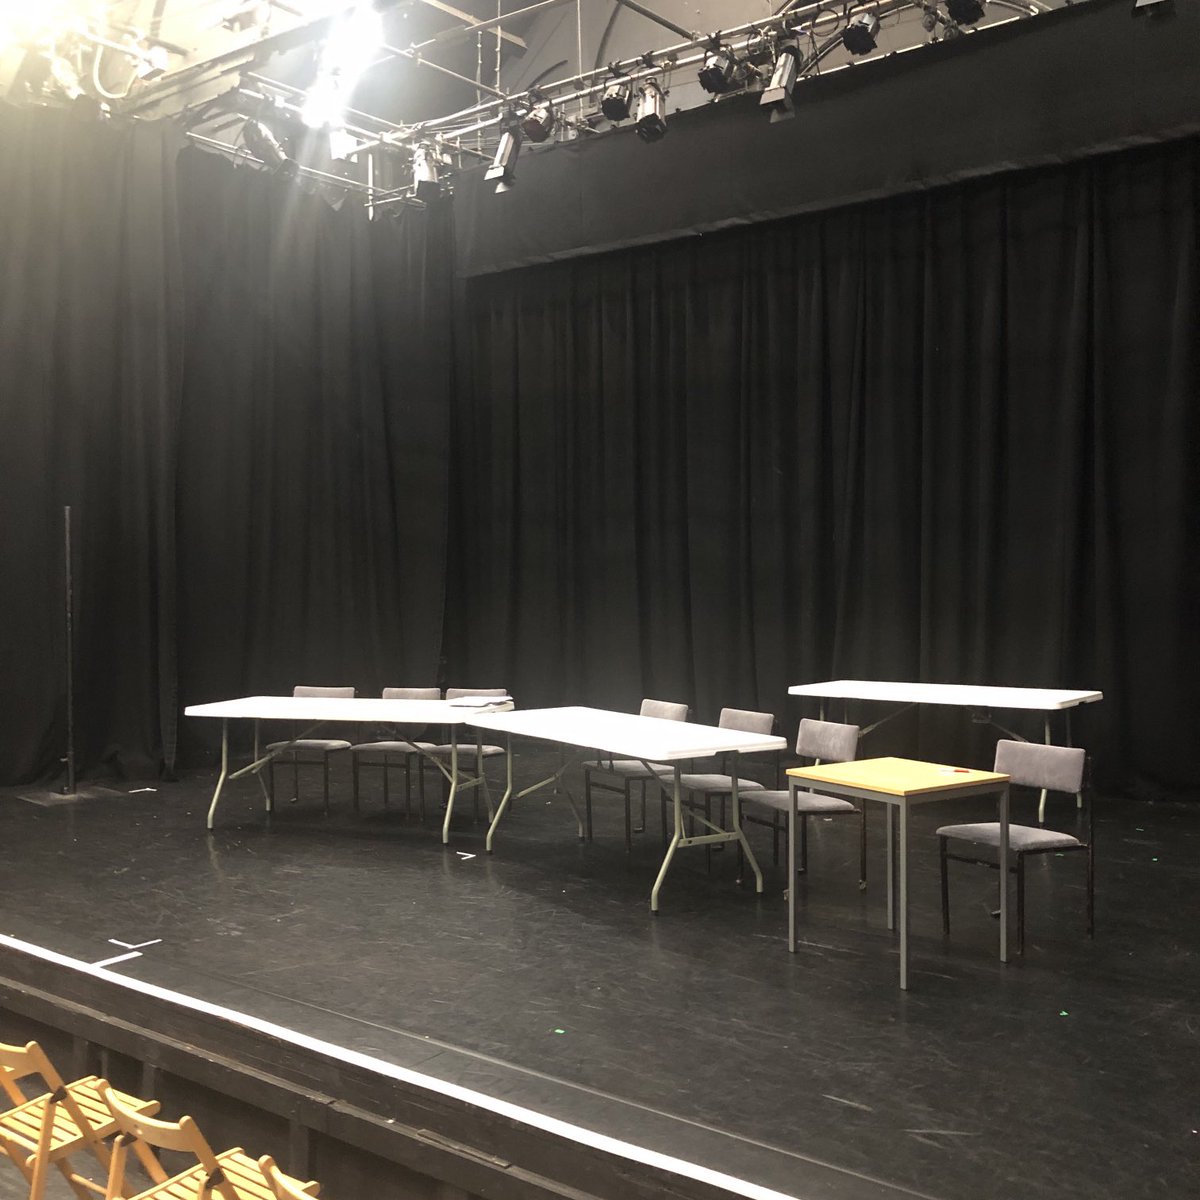 Setting up for our ACE-funded script development reading at ⁦@BarbicanTheatre⁩ from ⁦@CriTheatre⁩ New Writing - thanks to ⁦@LauraCHorton⁩ and ⁦@FelixMosse⁩